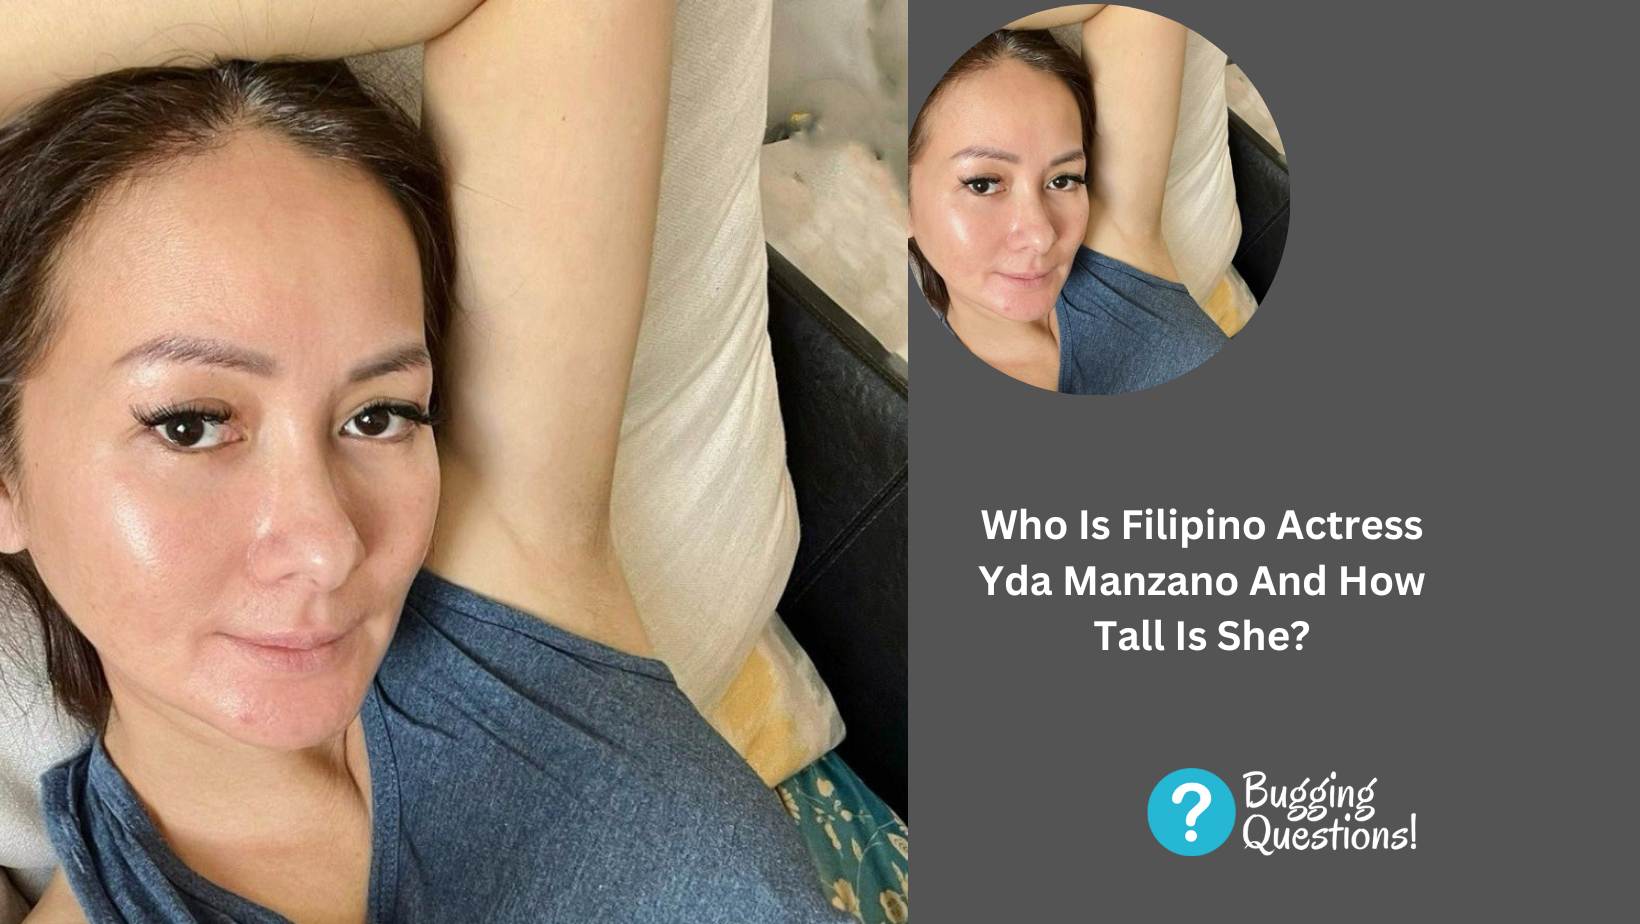 Who Is Filipino Actress Yda Manzano And How Tall Is She? Age, Height And Instagram Explored